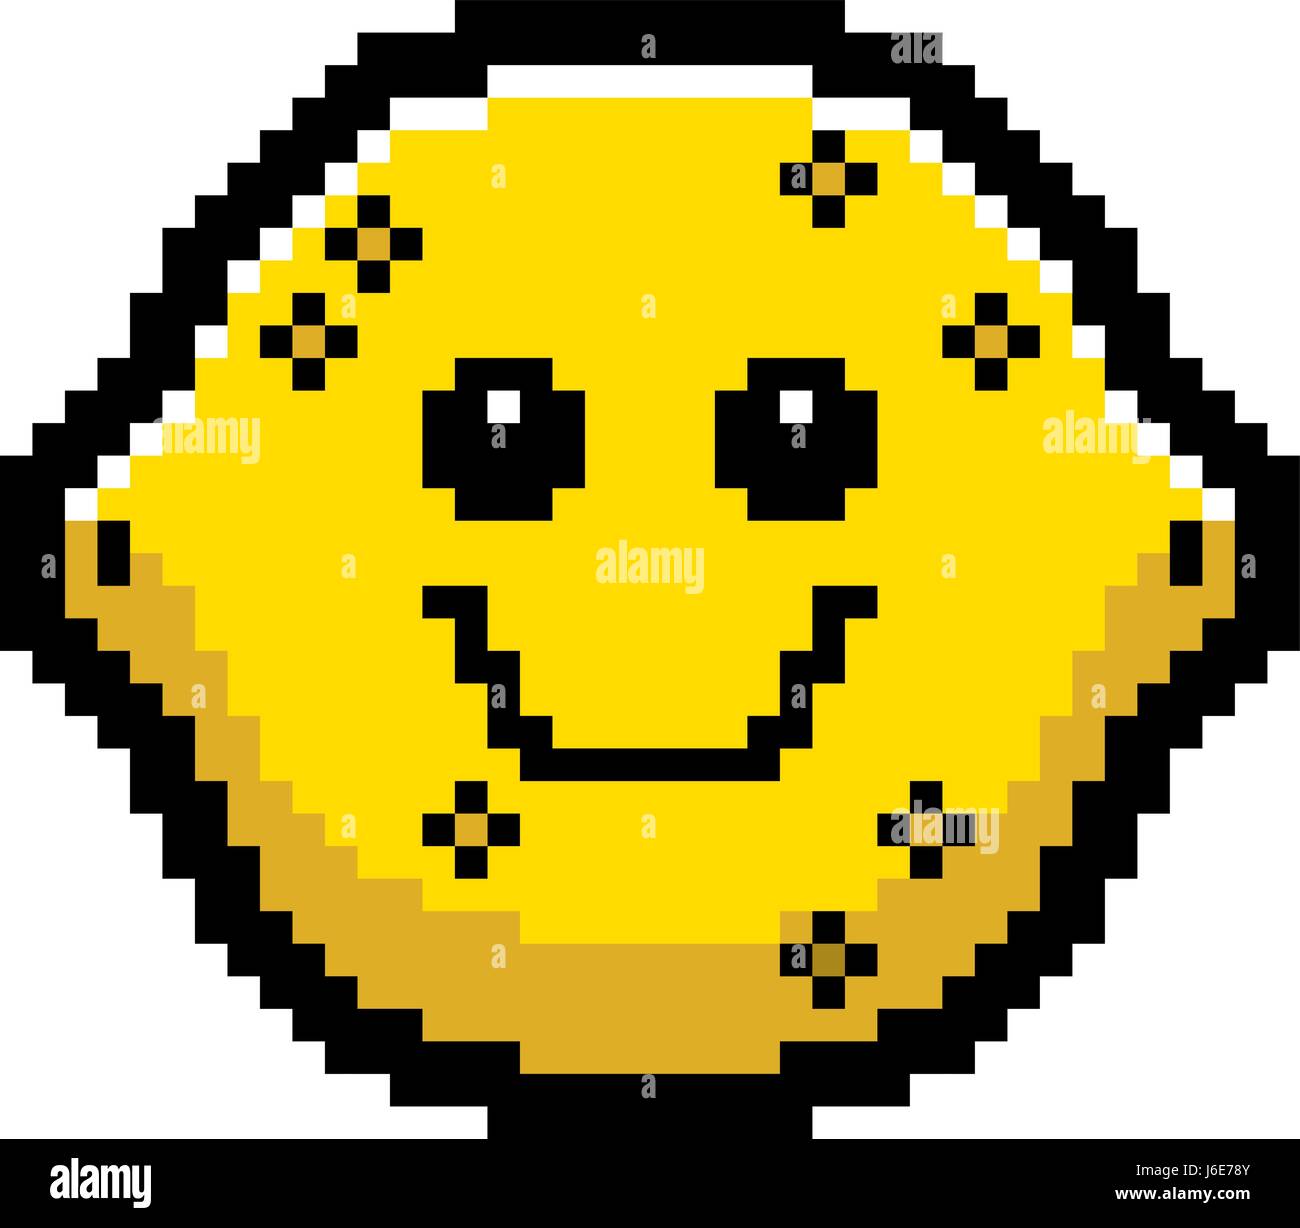 An illustration of a lemon smiling in an 8-bit cartoon style. Stock Vector